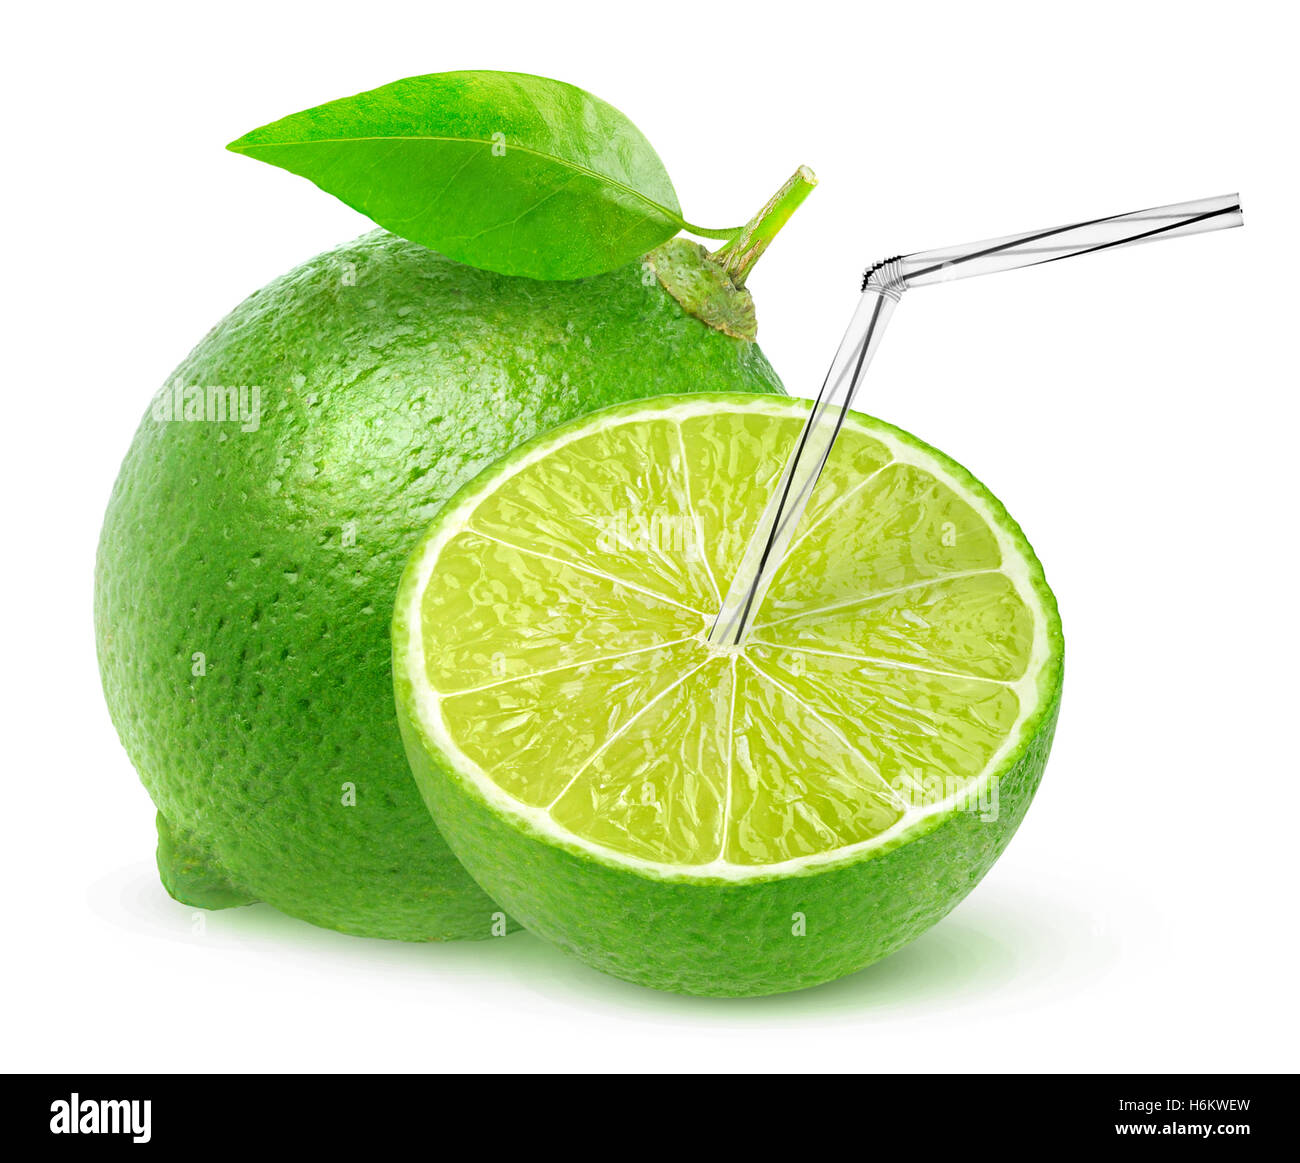 Isolated lime juice. One and a half lime fruit with straw in it, natural  fresh juice concept isolated on white background with c Stock Photo - Alamy